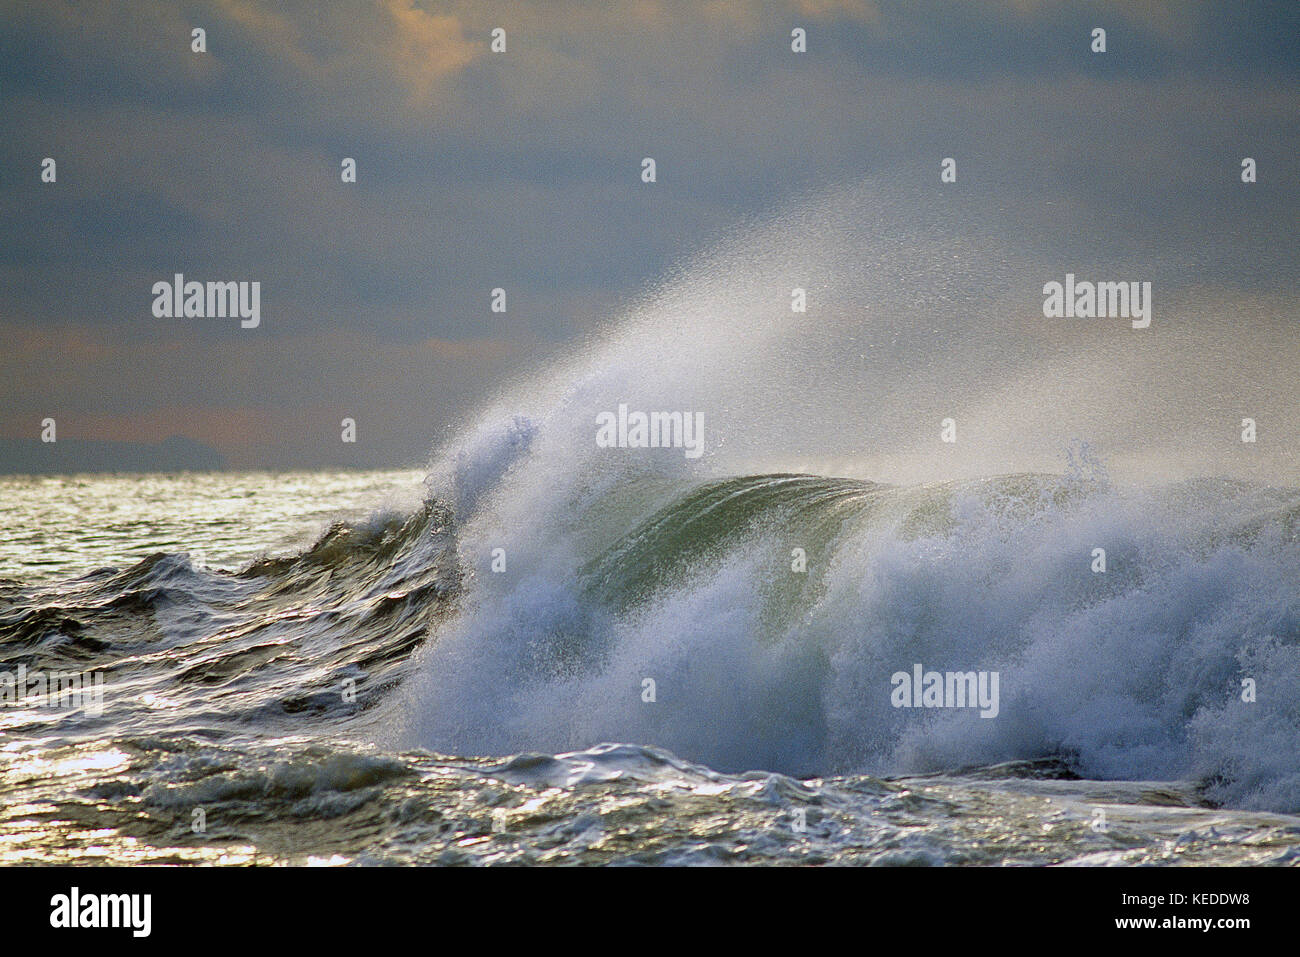 Scenic. Stormy sky over the Atlantic ocean with large wave breaking. Stock Photo